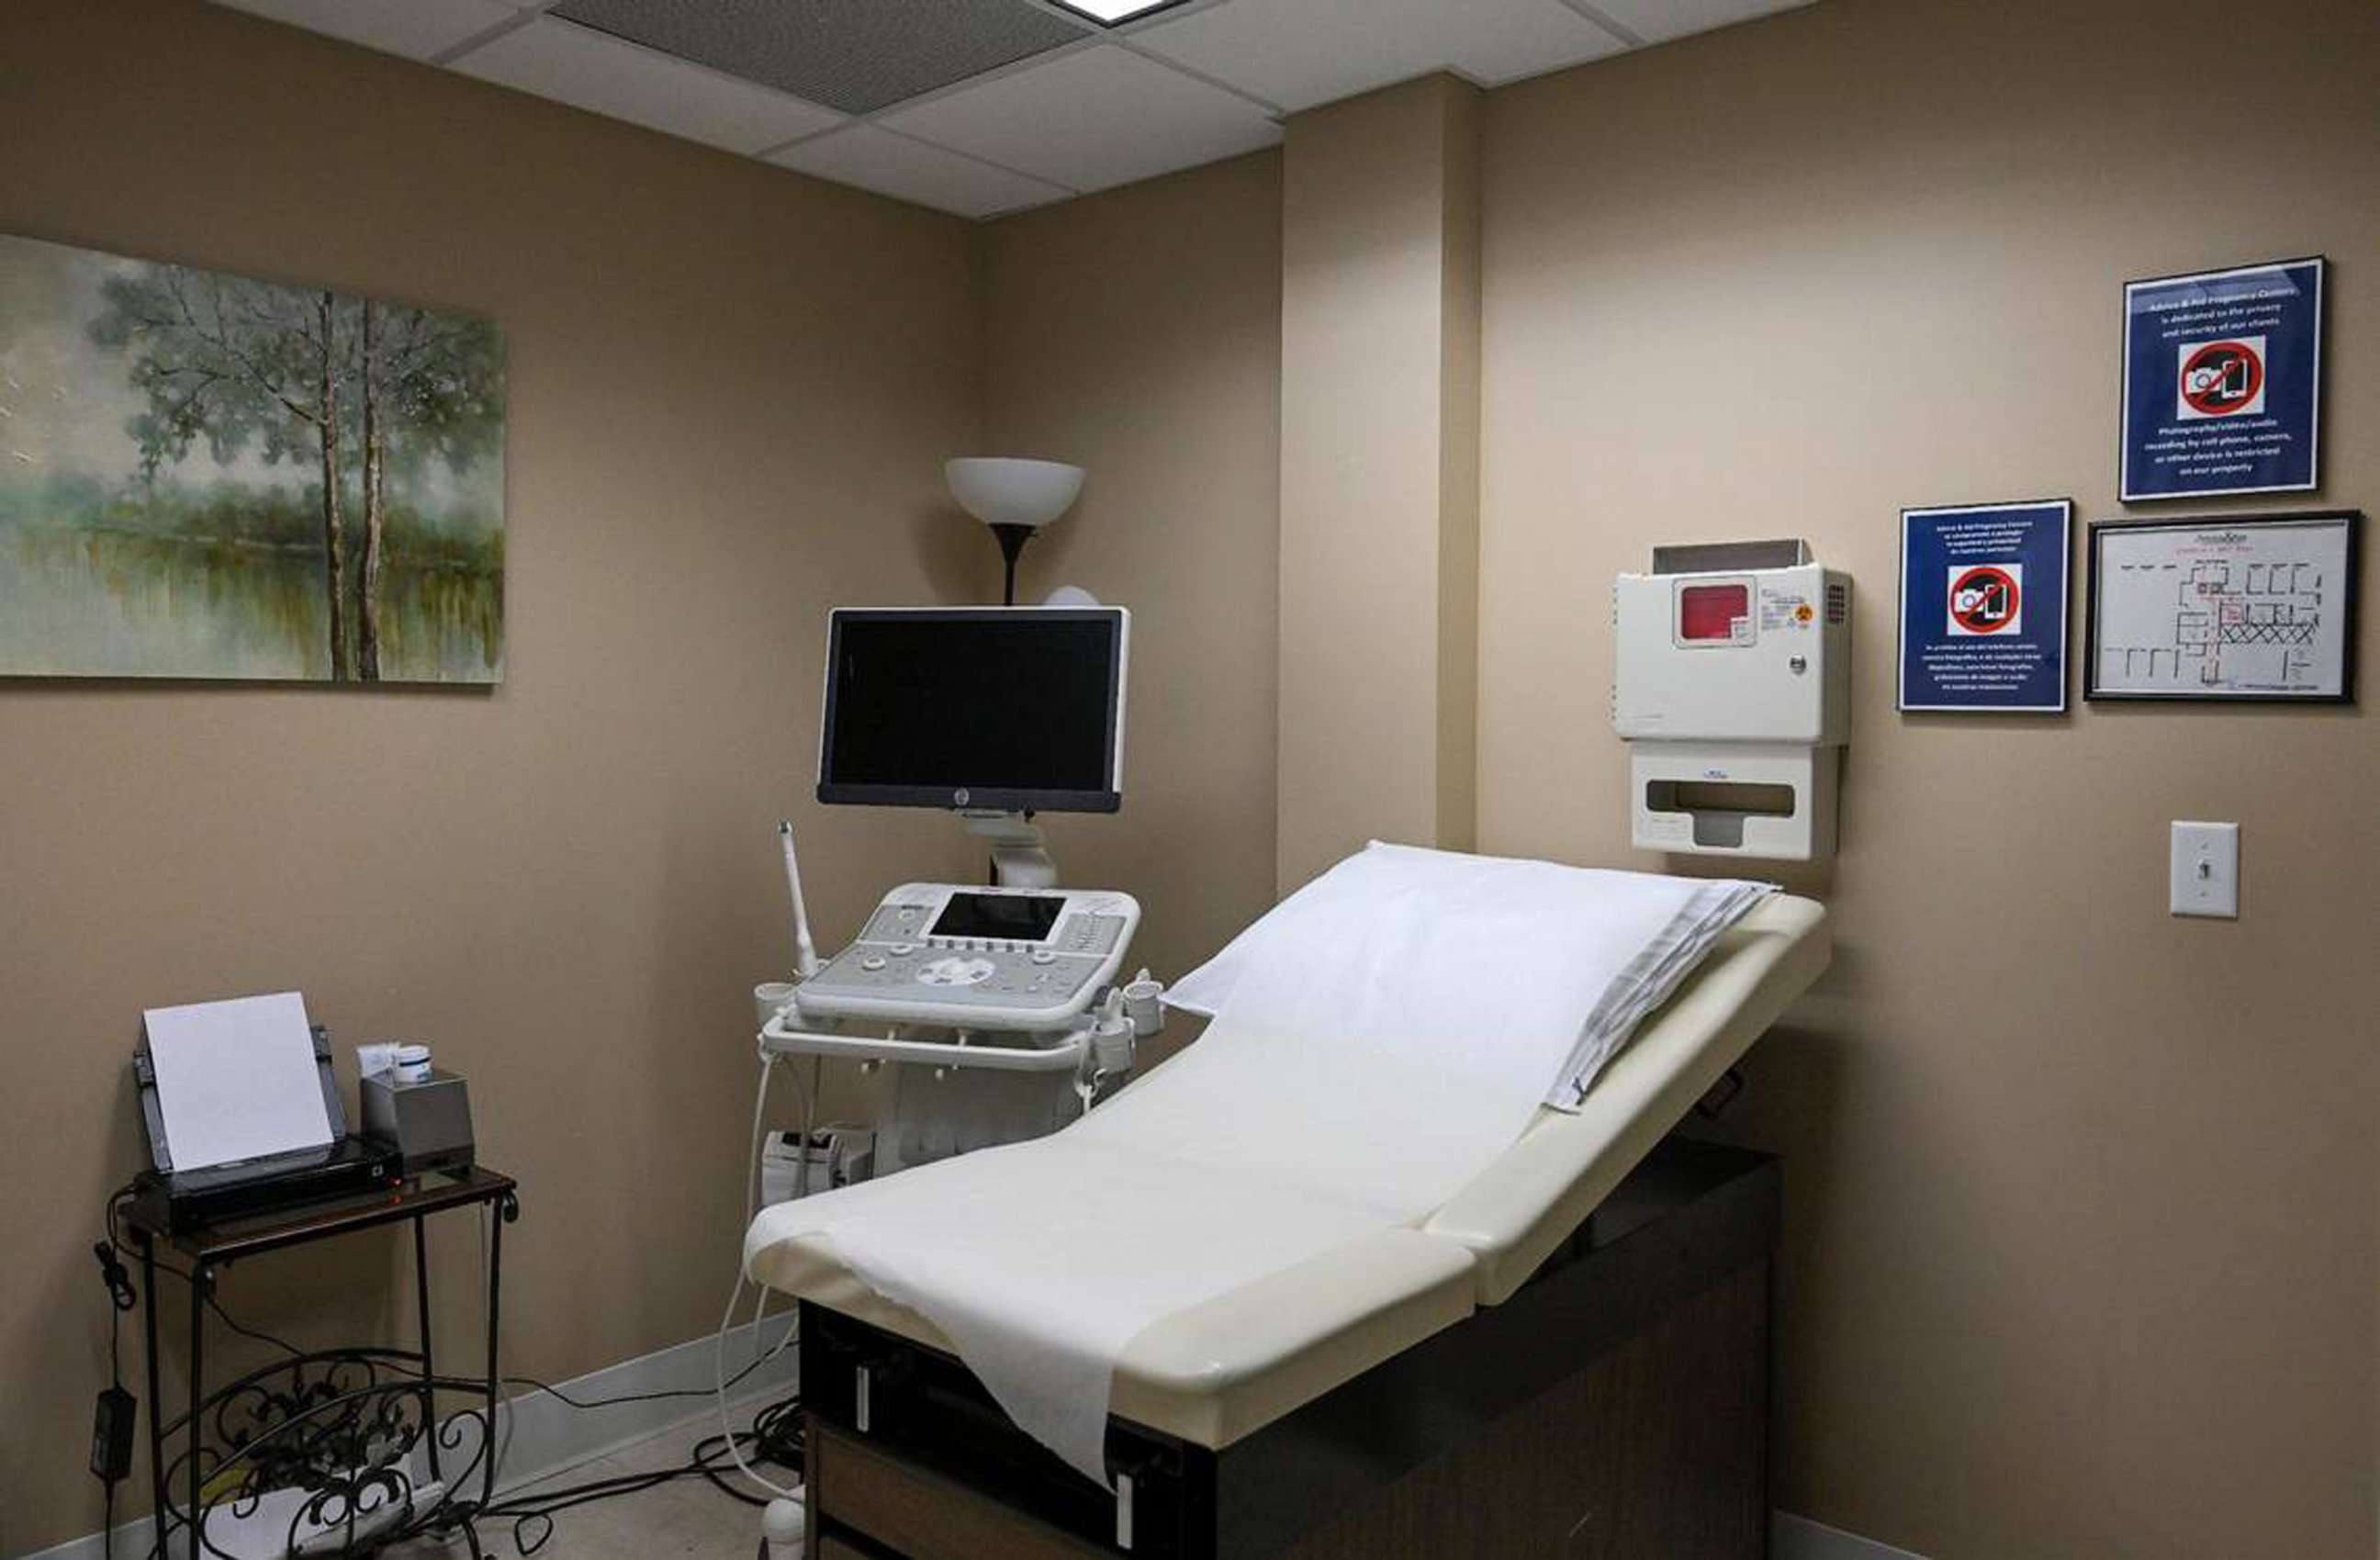 PHOTO: File image where a medical bed sits in an examination room.